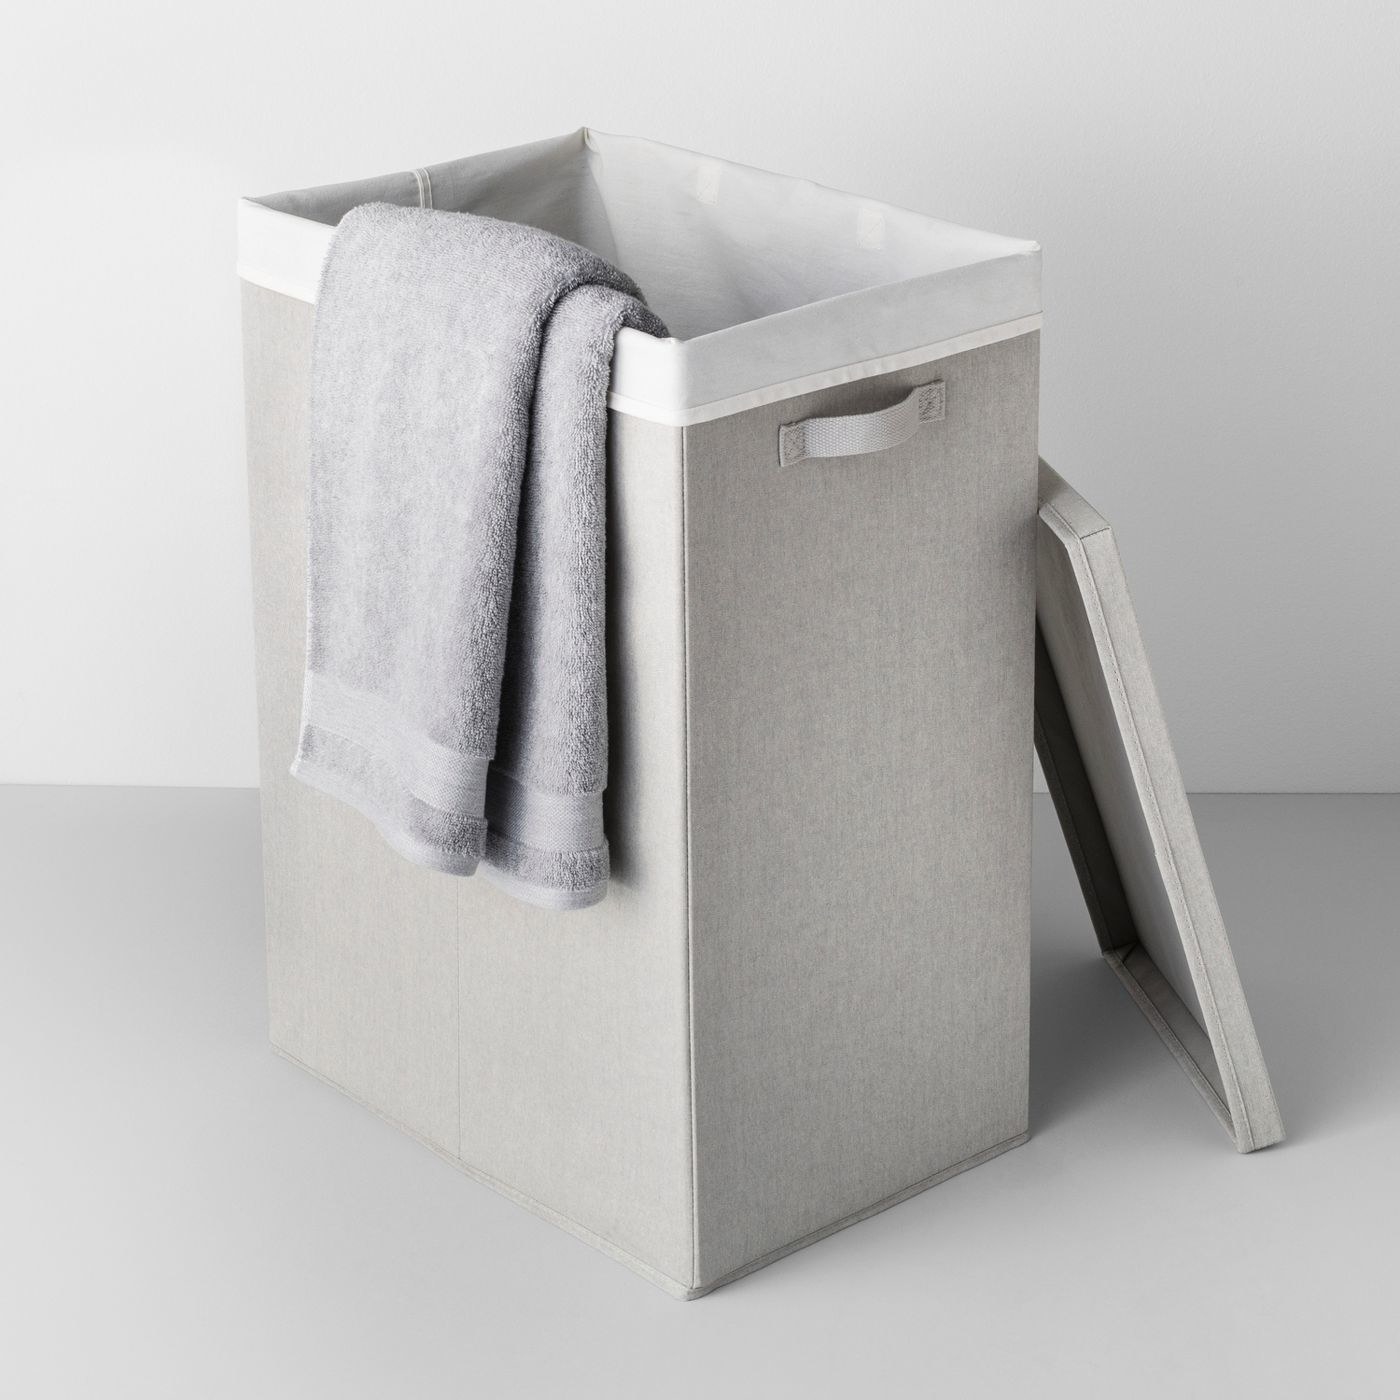 A gray fabric collapsible hamper